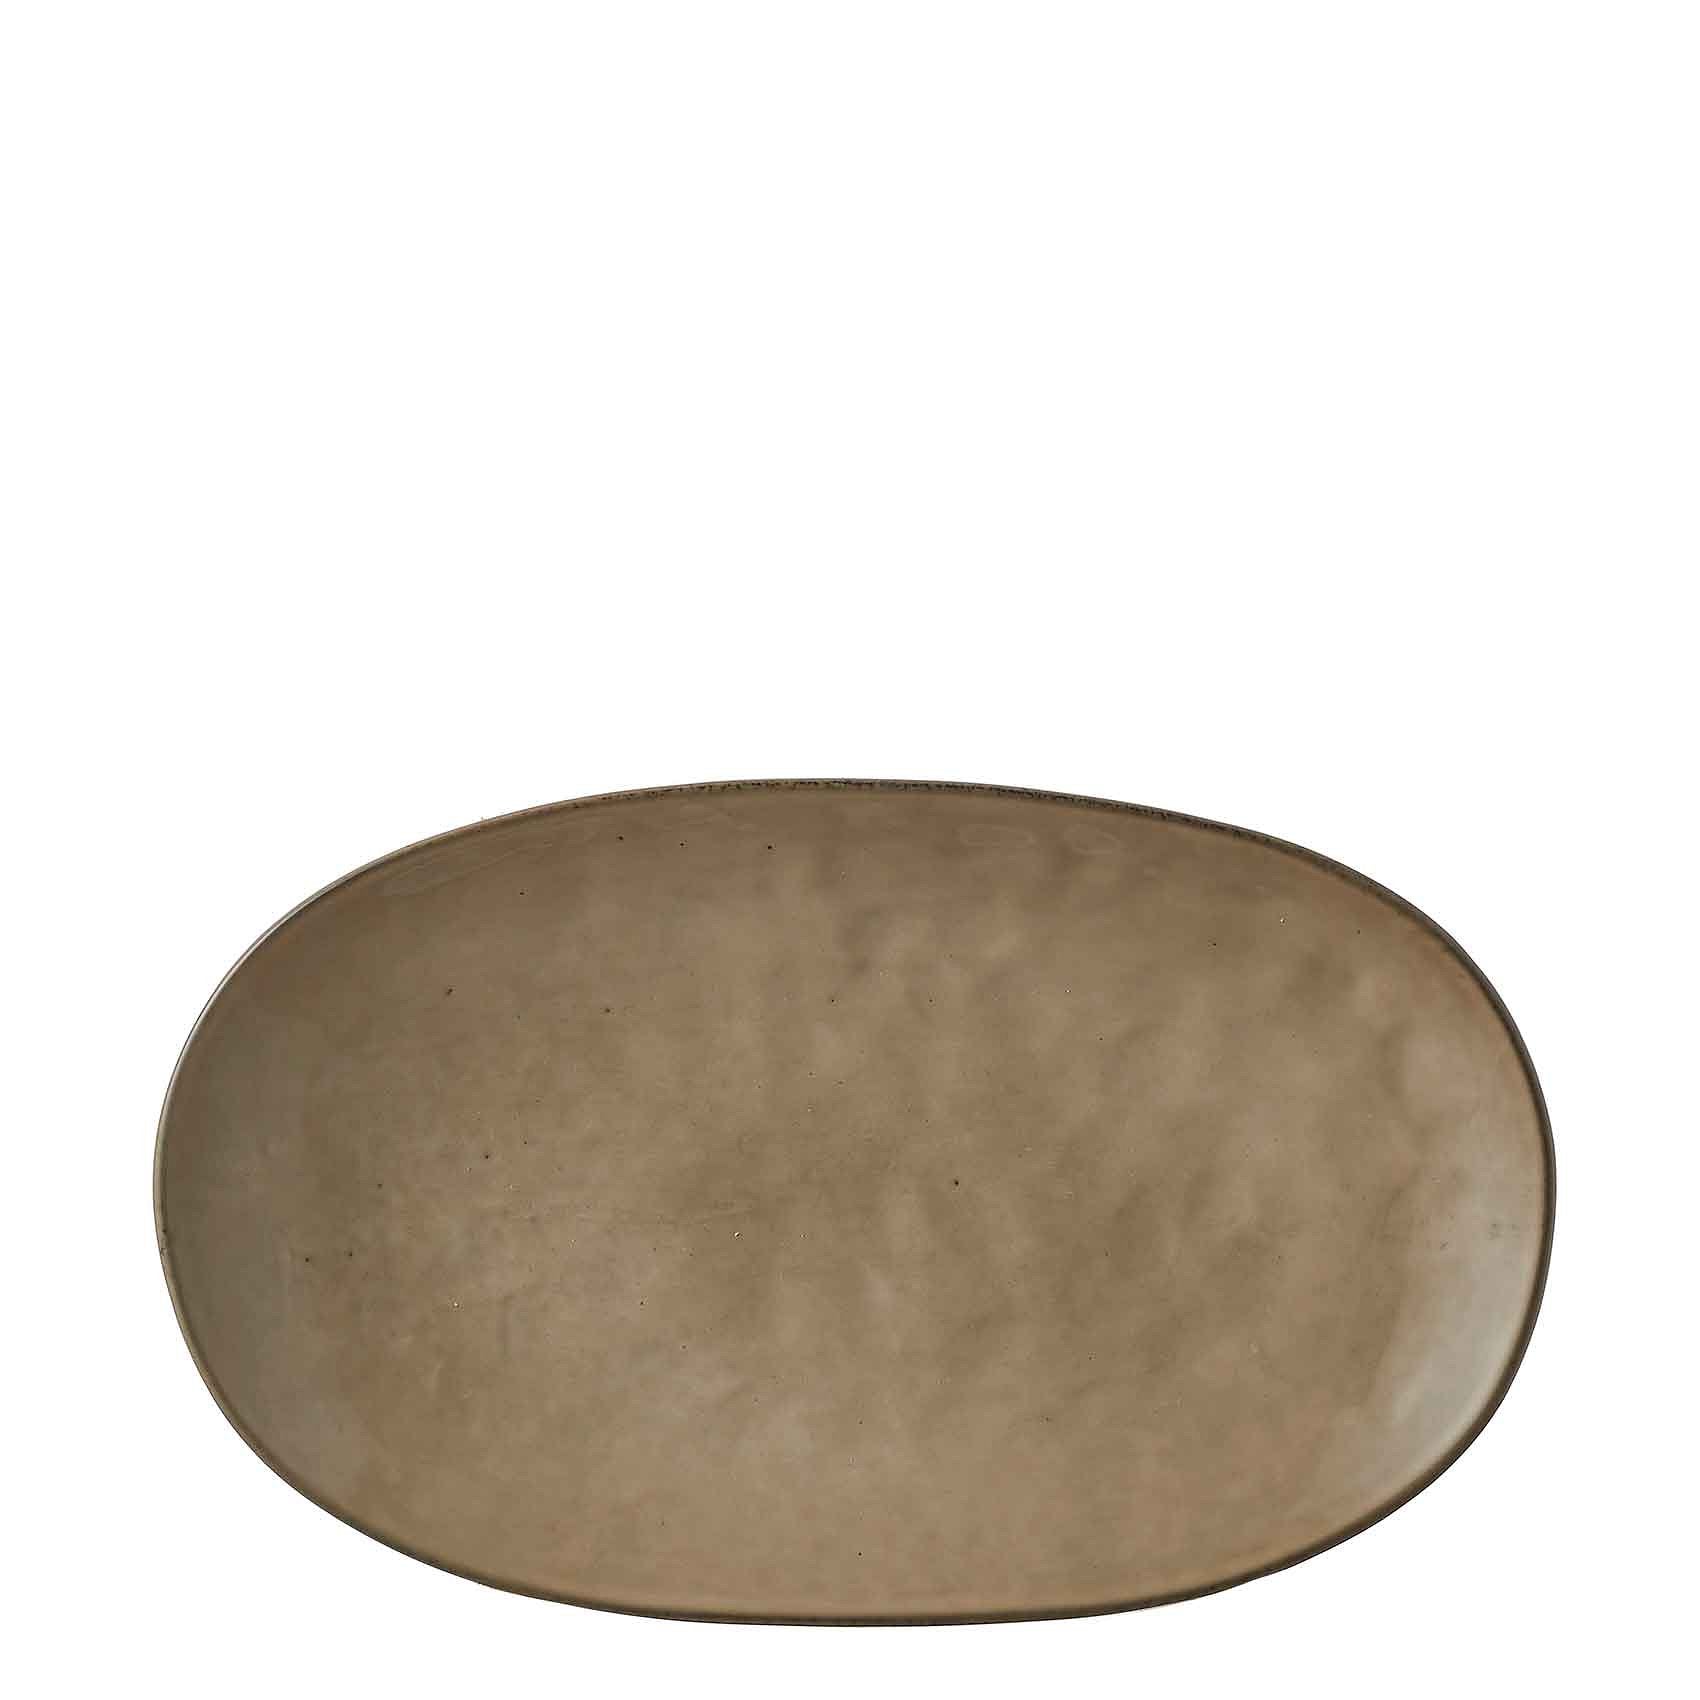 Mica Decorations tabo bord creme maat in cm: 35,5 x 21,5 x 4,5